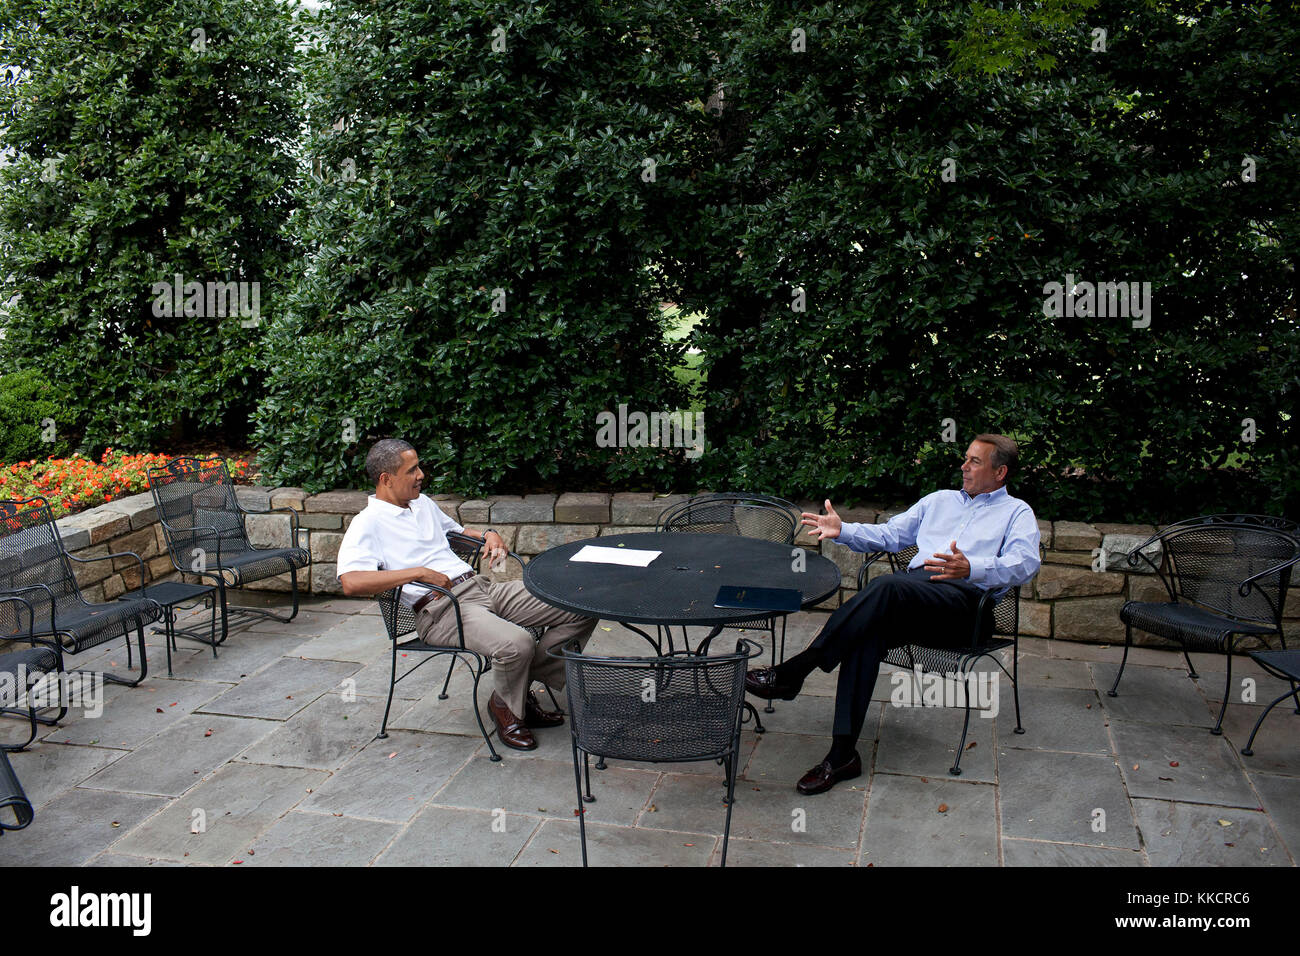 President Barack Obama meets with Speaker of the House John Boehner on the patio near the Oval Office, Sunday, July 3, 2011. Stock Photo